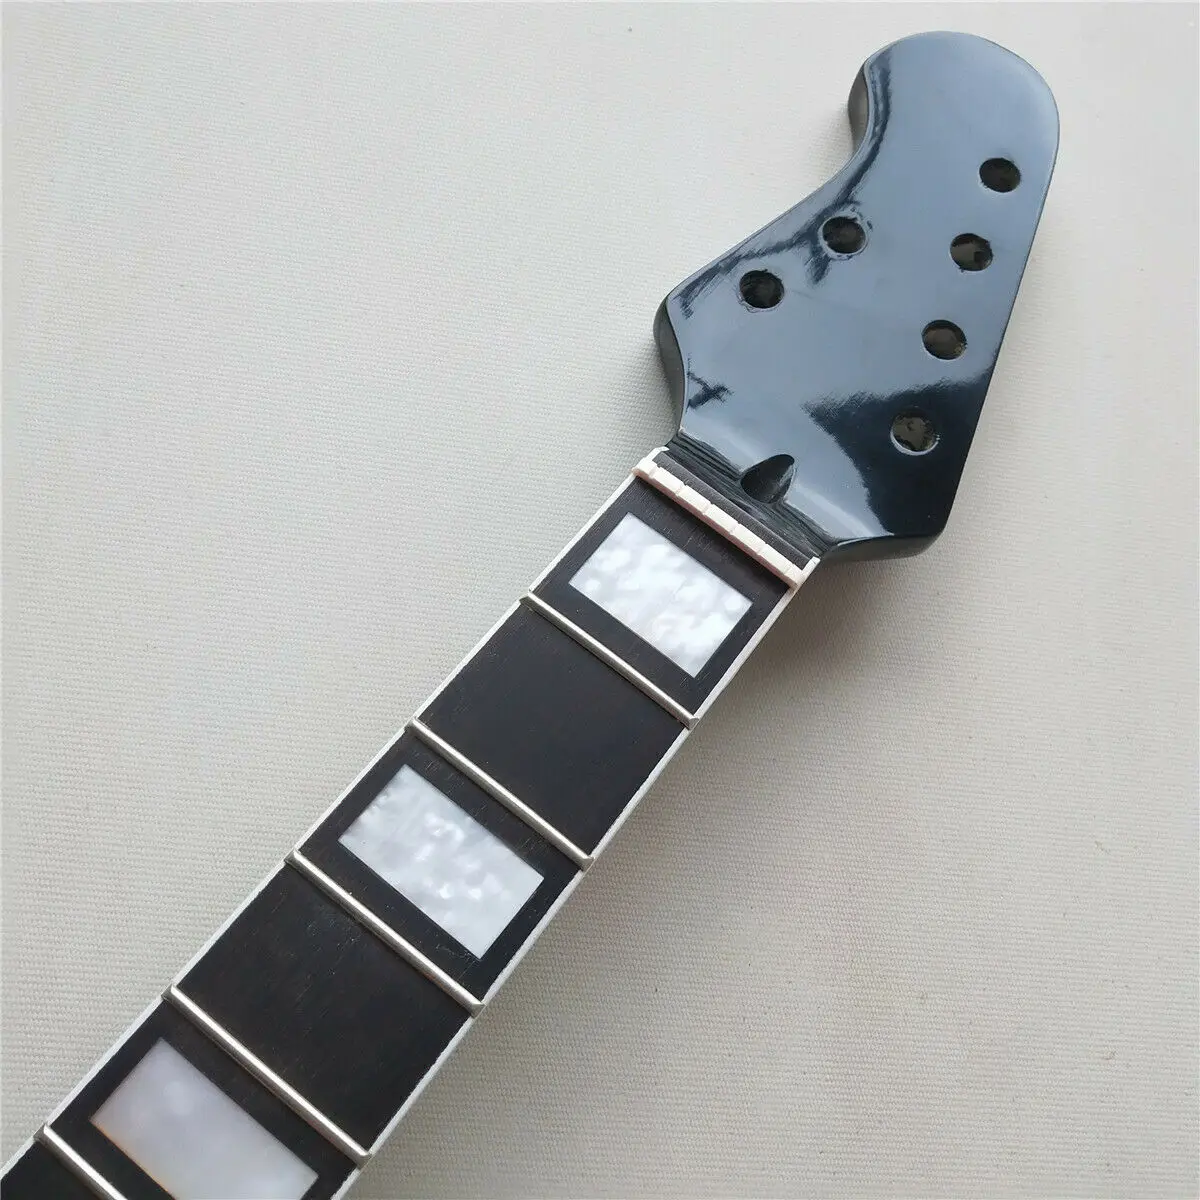 Reverse head Black 4+2 Tuners Guitar Neck 22Fret 25.5inch Rosewood Fretboard parts New Replacement